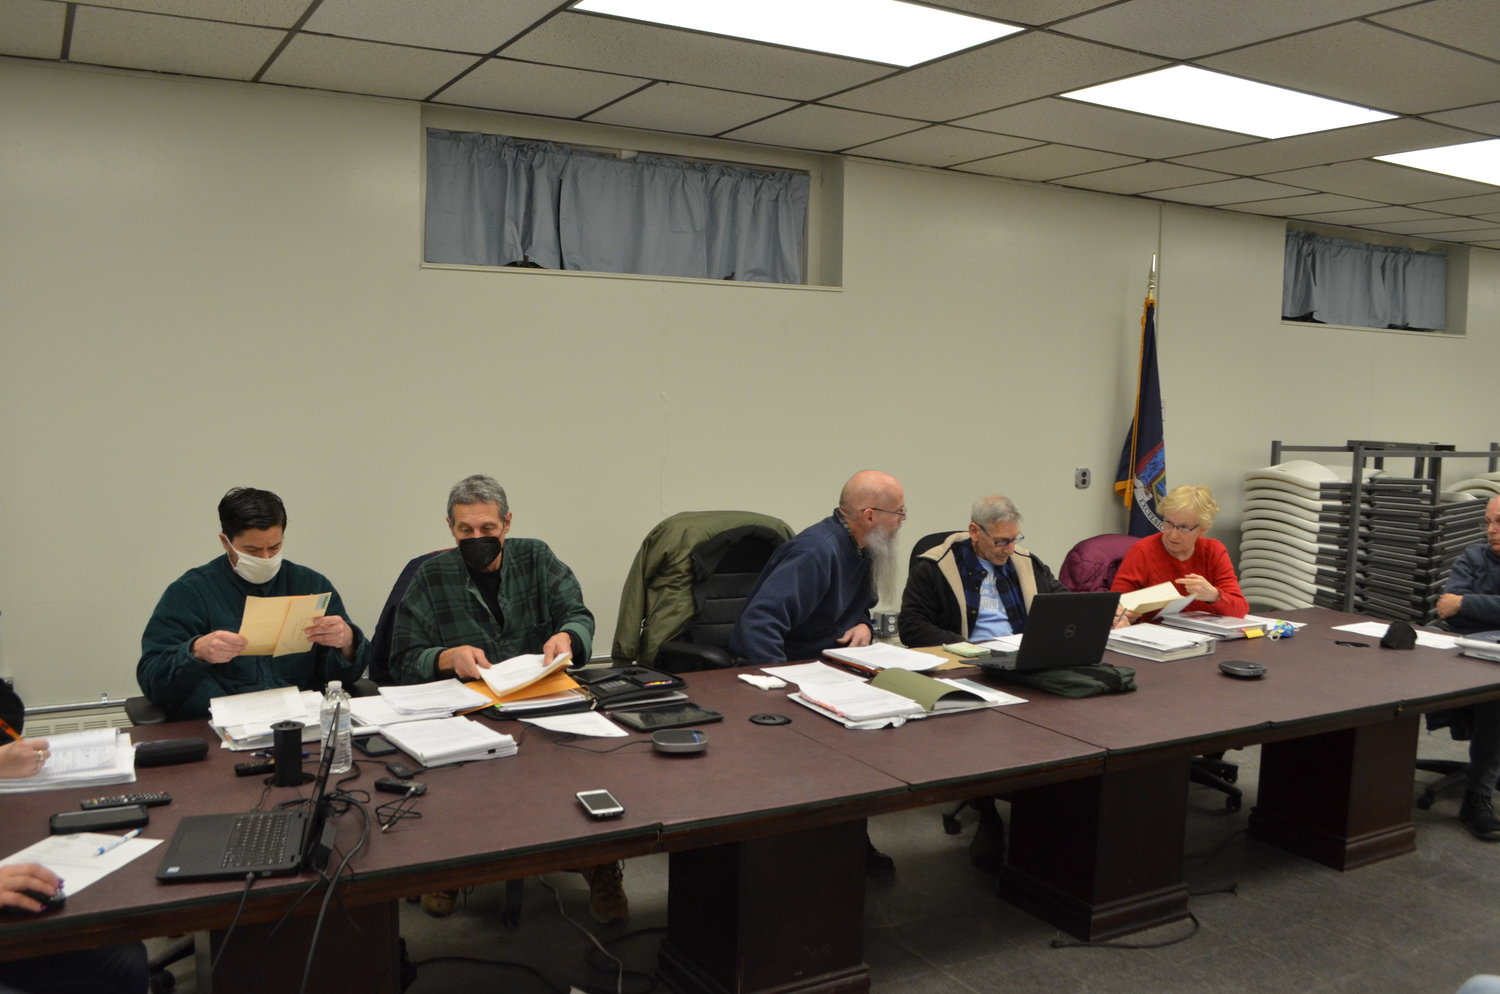 The members of Tusten's Zoning Board of Appeals deliberating at its February 14 meeting.